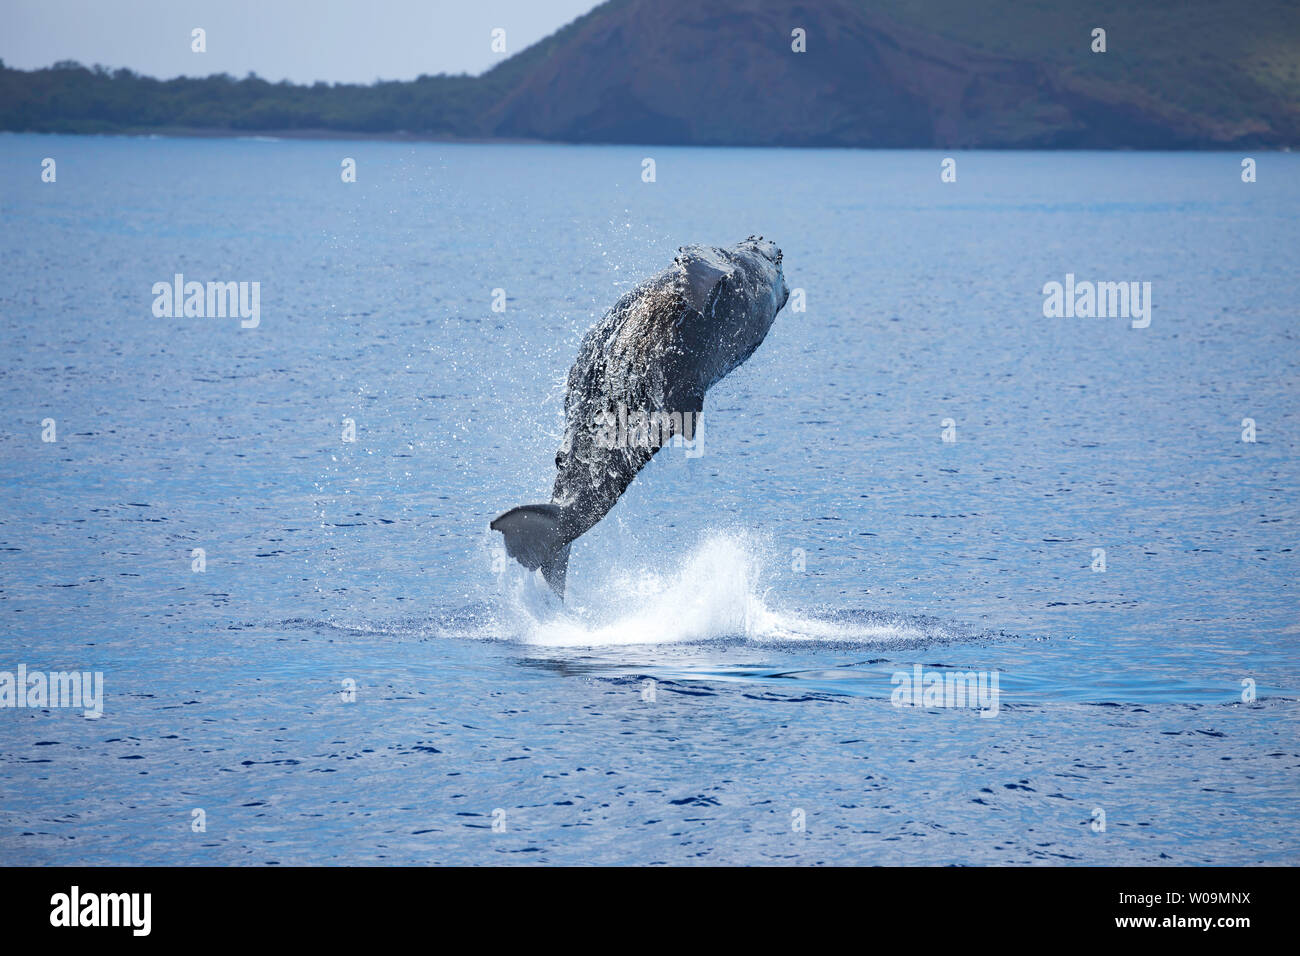 This breaching humpback whale, Megaptera novaeangliae, is completely out of the water, Hawaii. Stock Photo